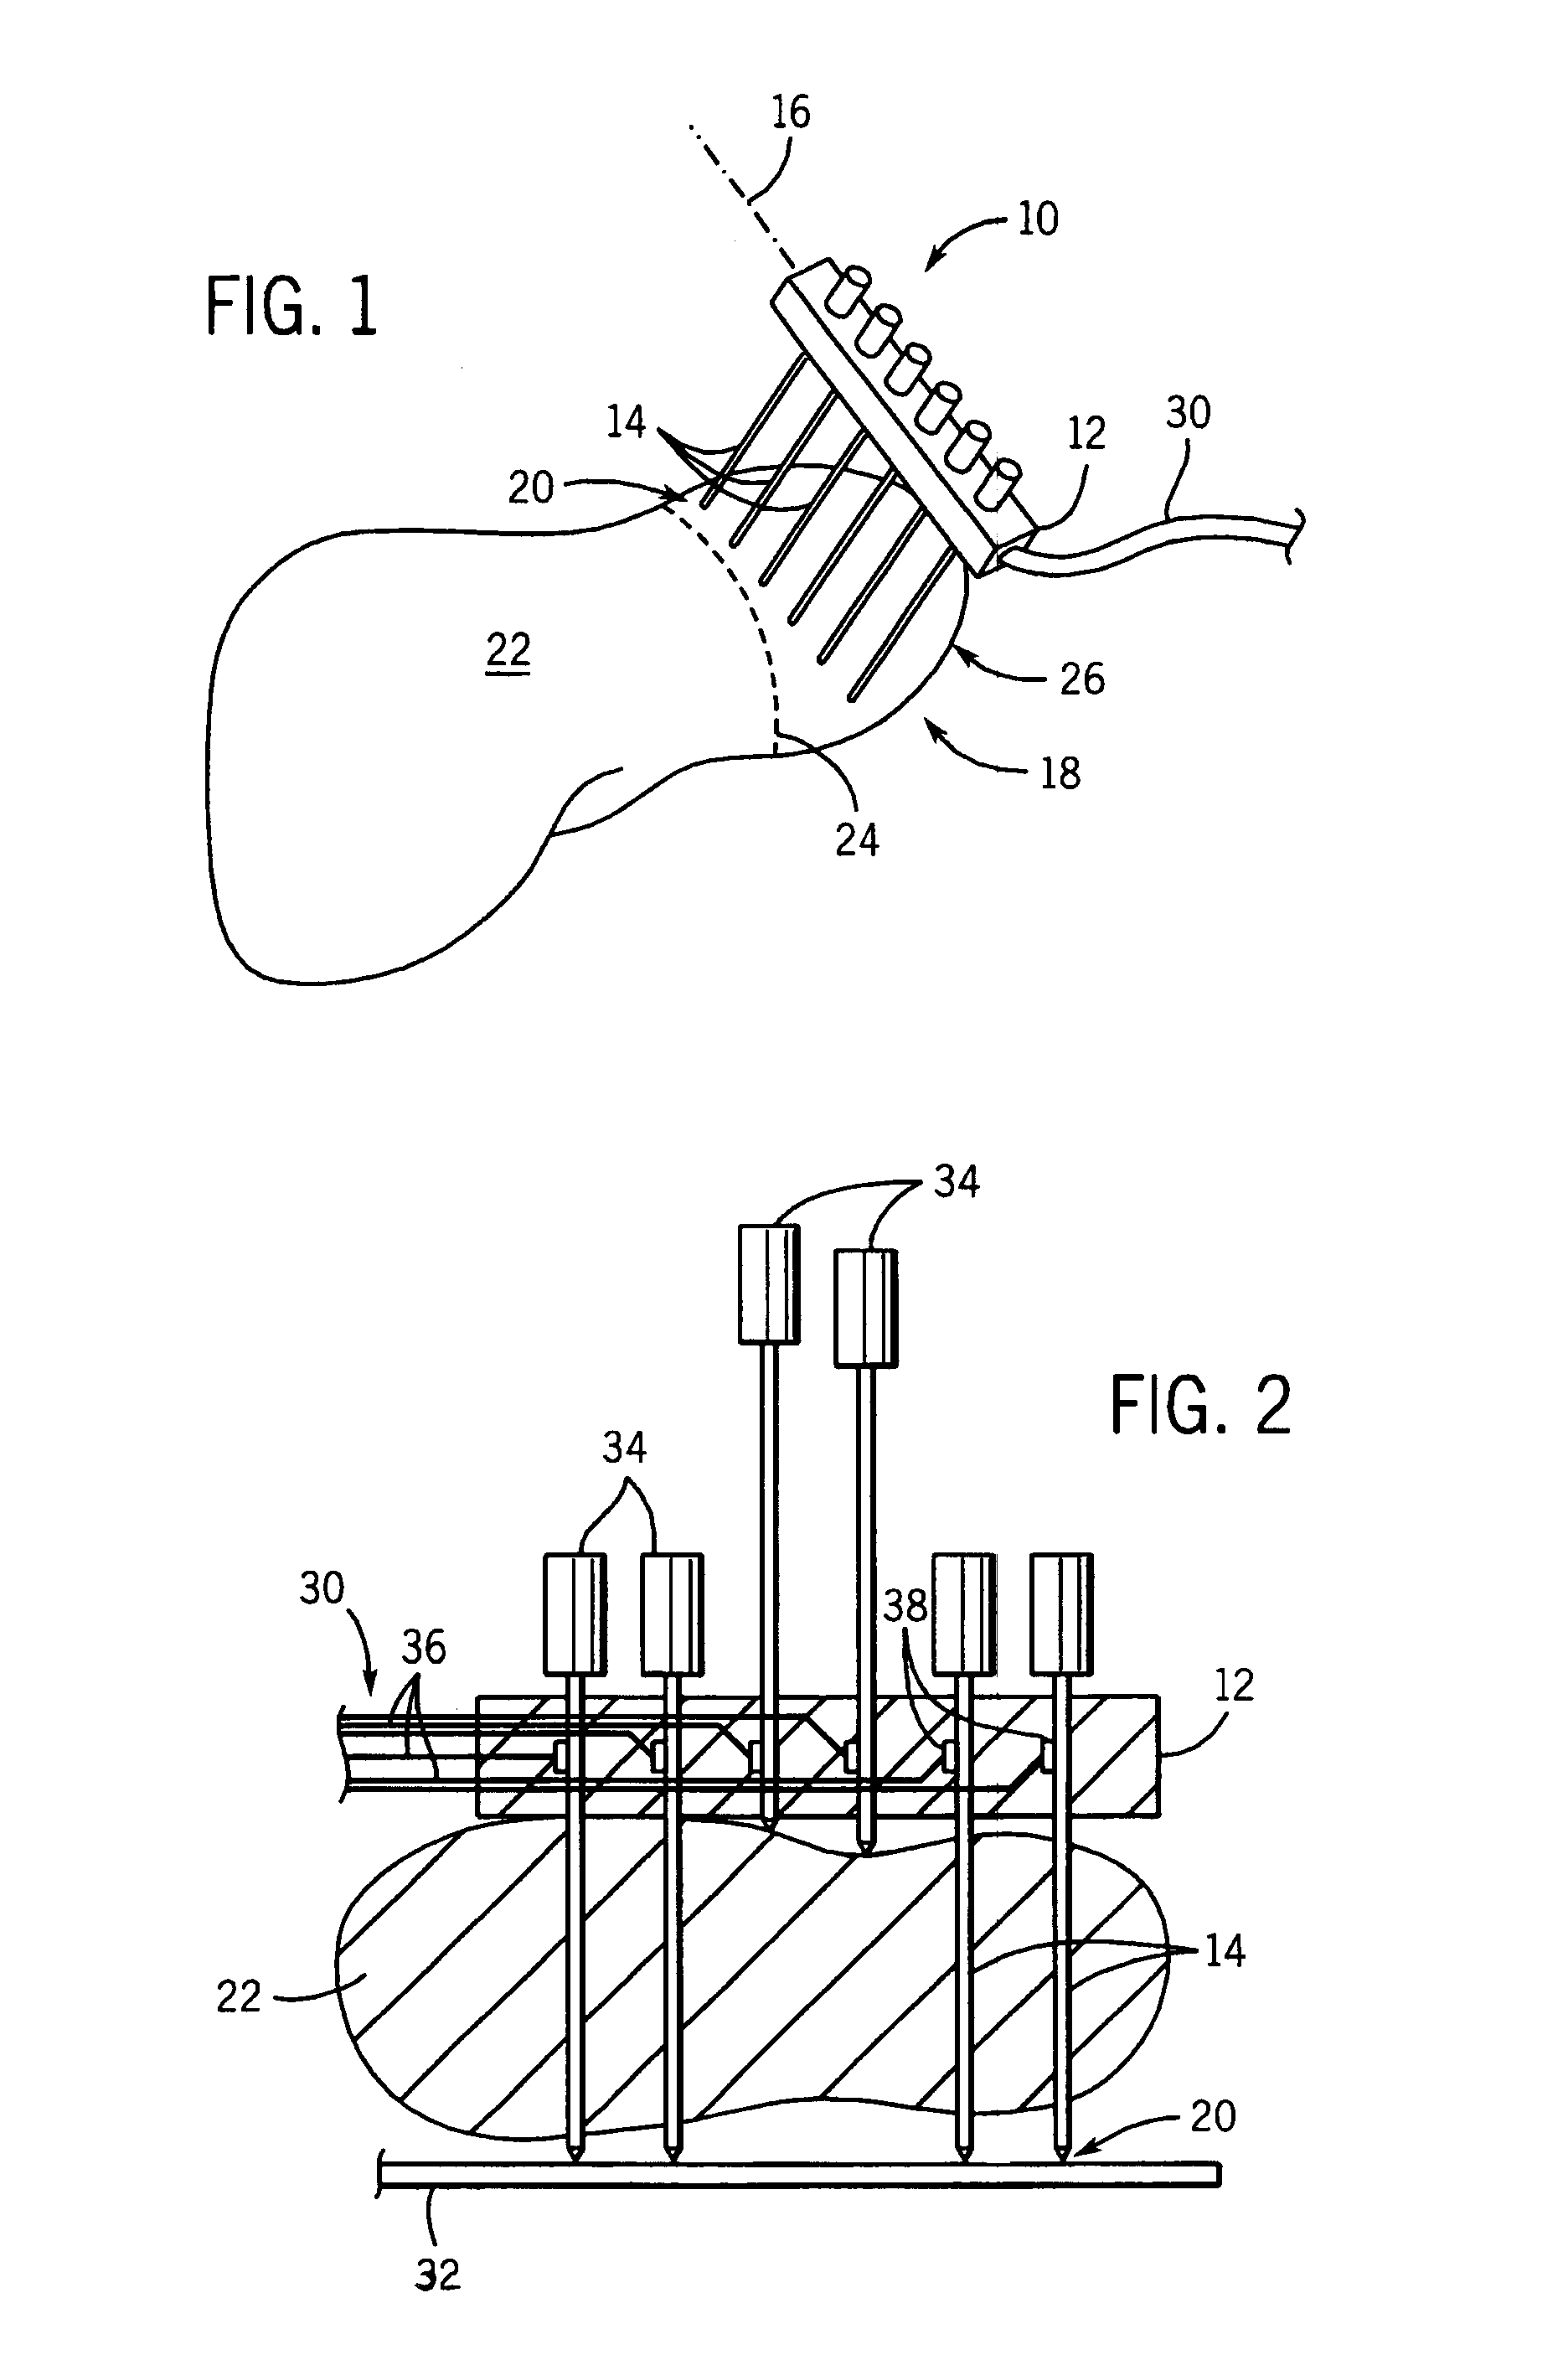 Electrode array for tissue ablation